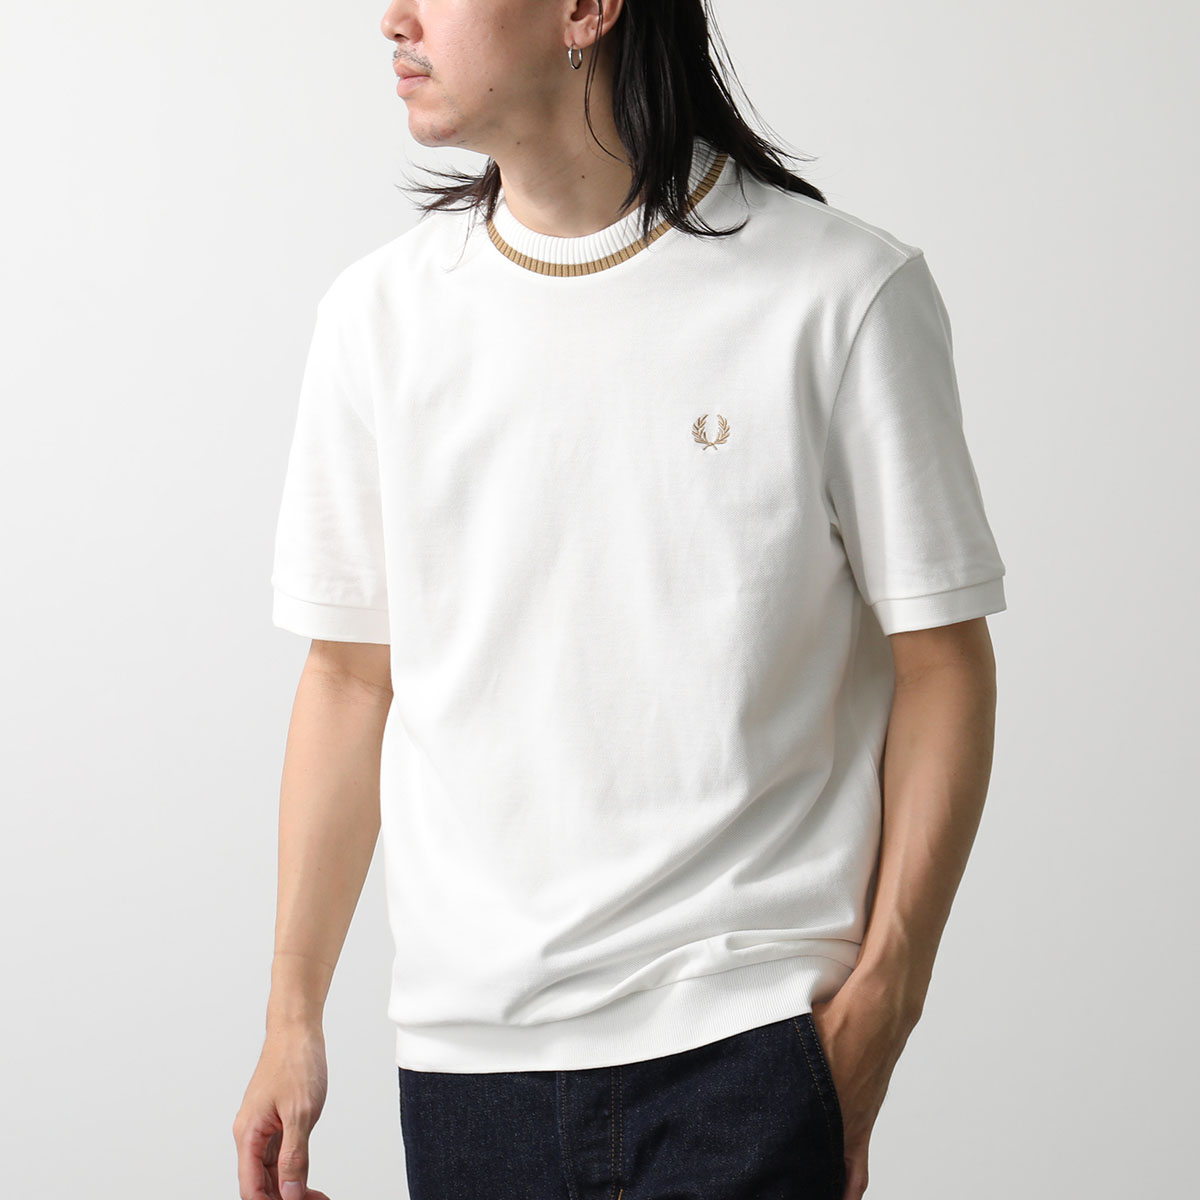 FRED PERRY Tシャツ CREW NECK PIQUE T-SHIRT M7 メンズ ニット...